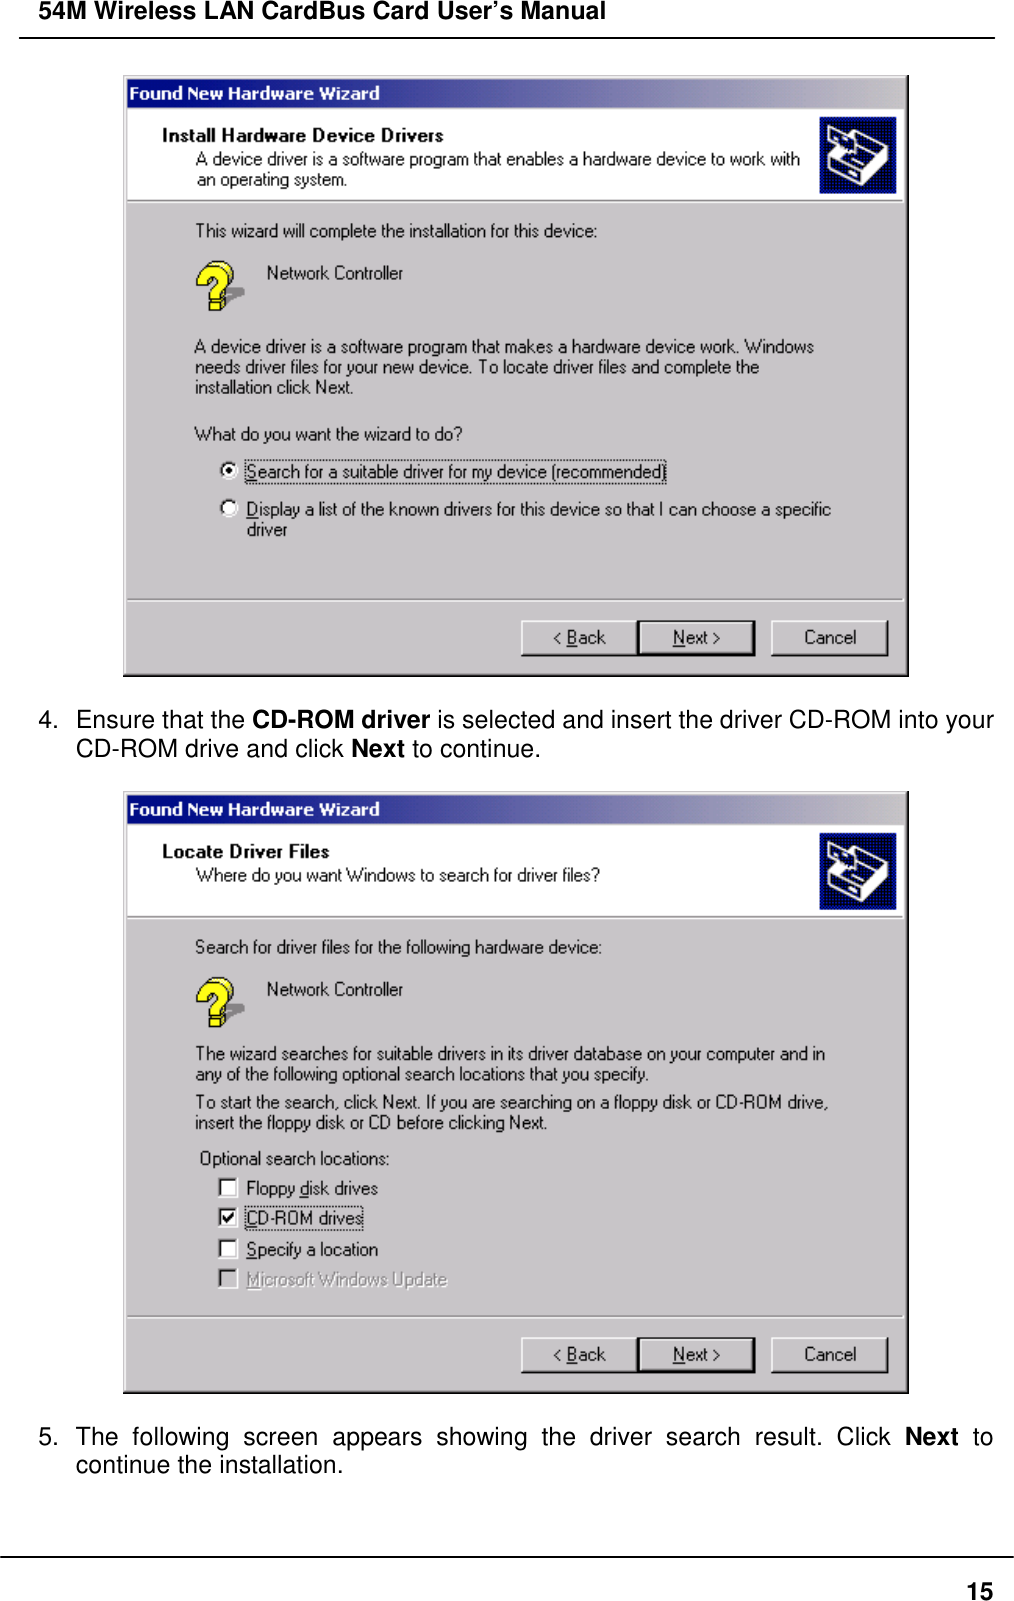 54M Wireless LAN CardBus Card User’s Manual154.  Ensure that the CD-ROM driver is selected and insert the driver CD-ROM into yourCD-ROM drive and click Next to continue.5. The following screen appears showing the driver search result. Click Next  tocontinue the installation.